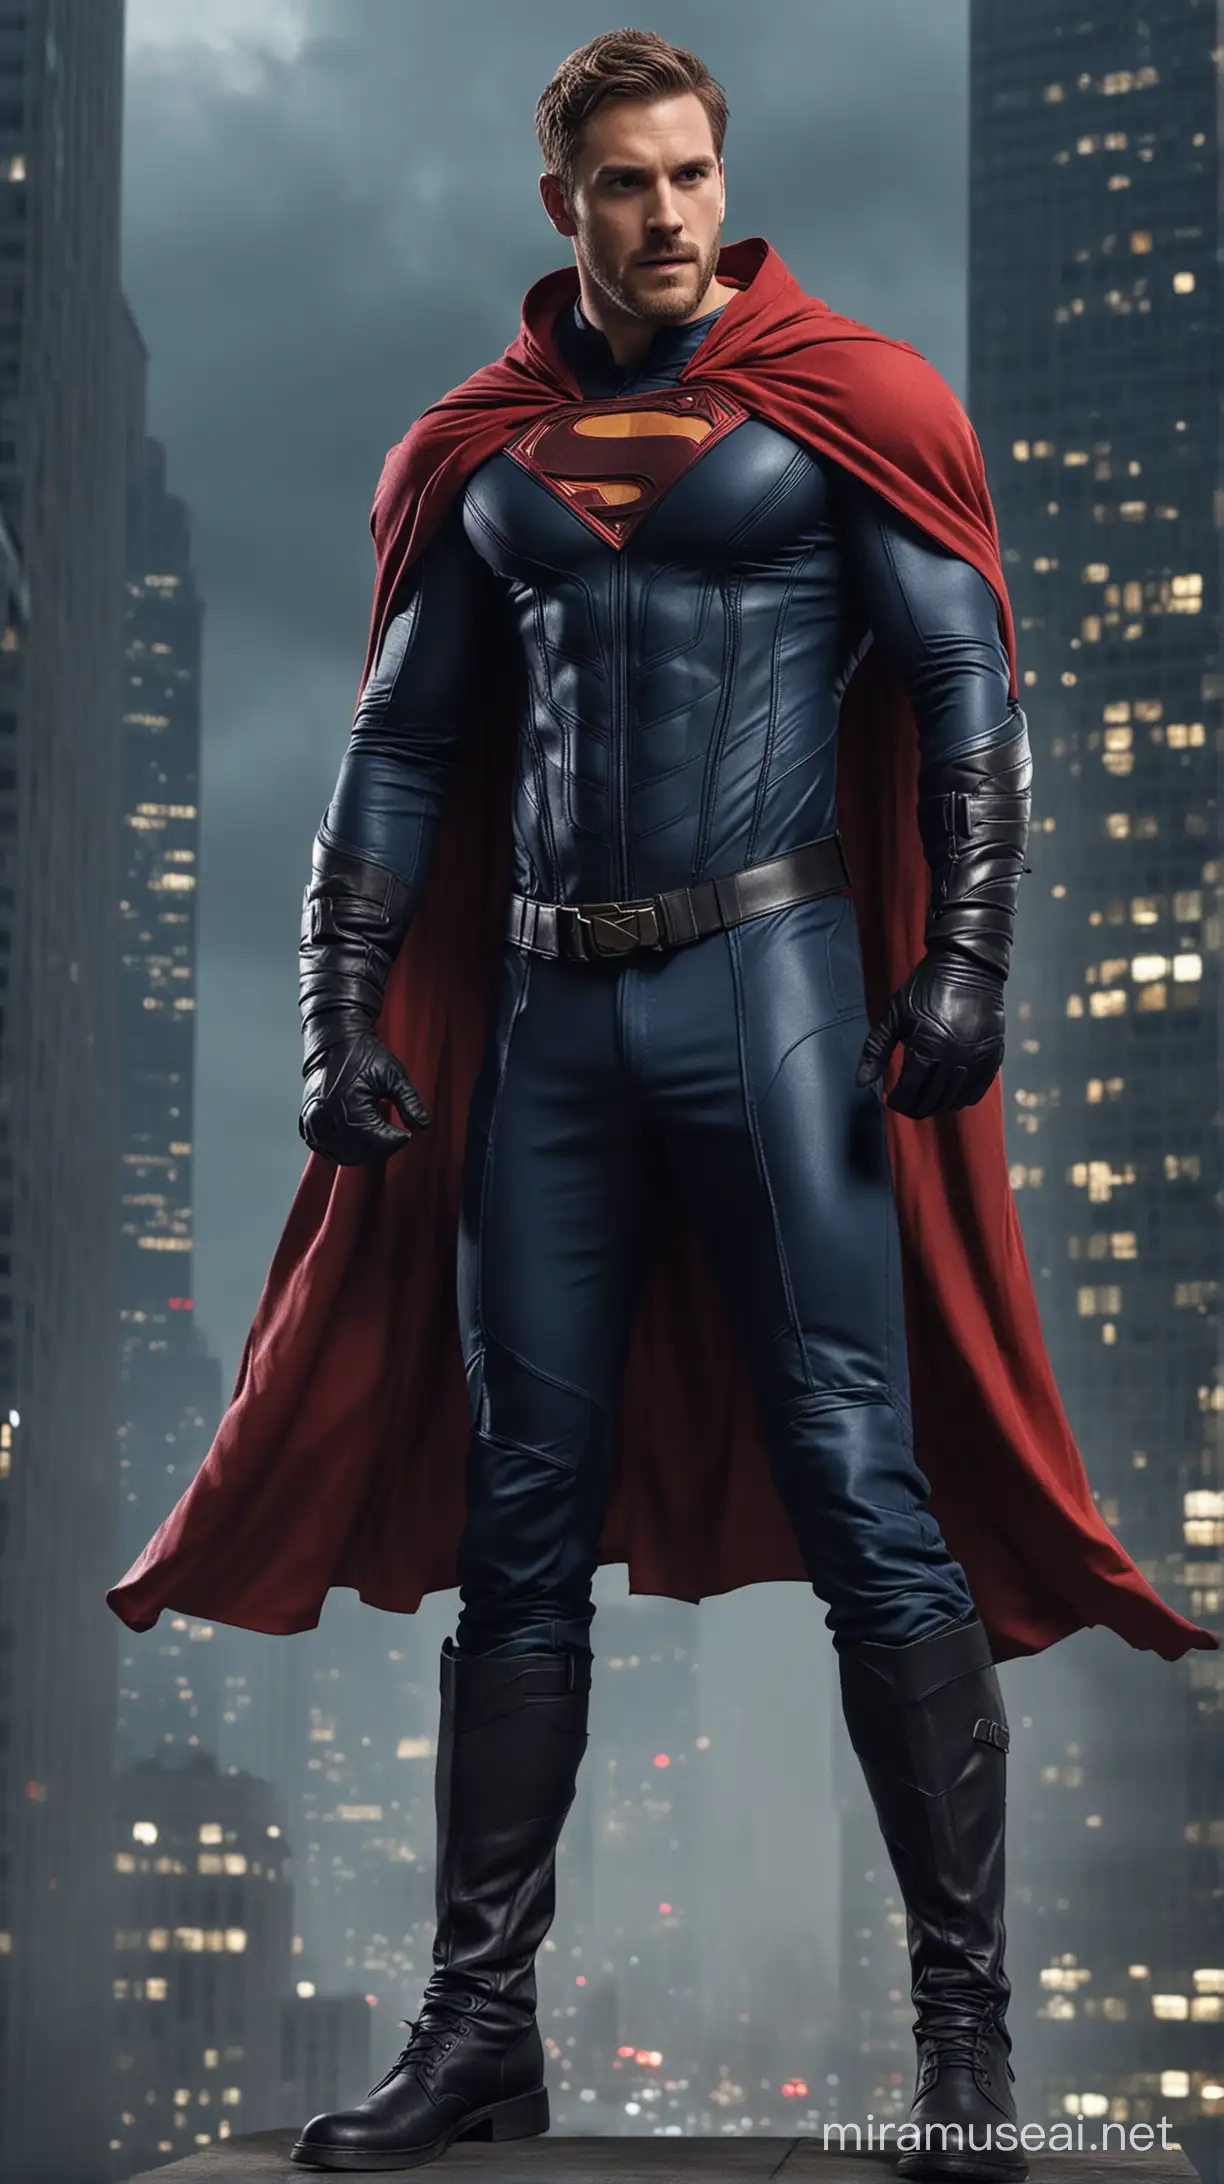 Chris Wood, the muscular superhero with his long cascading blond hair and bushy beard, stands in the heart of a modern skyscraper on a cloudy night. His tight-fitting red suit clings to his chiseled physique, while a long, flowing blue cape billows behind him as he moves. Black leather boots and gloves complete his stylish superhero ensemble as he prepares to face whatever danger lurks in the shadows of the city's darkest corners.


